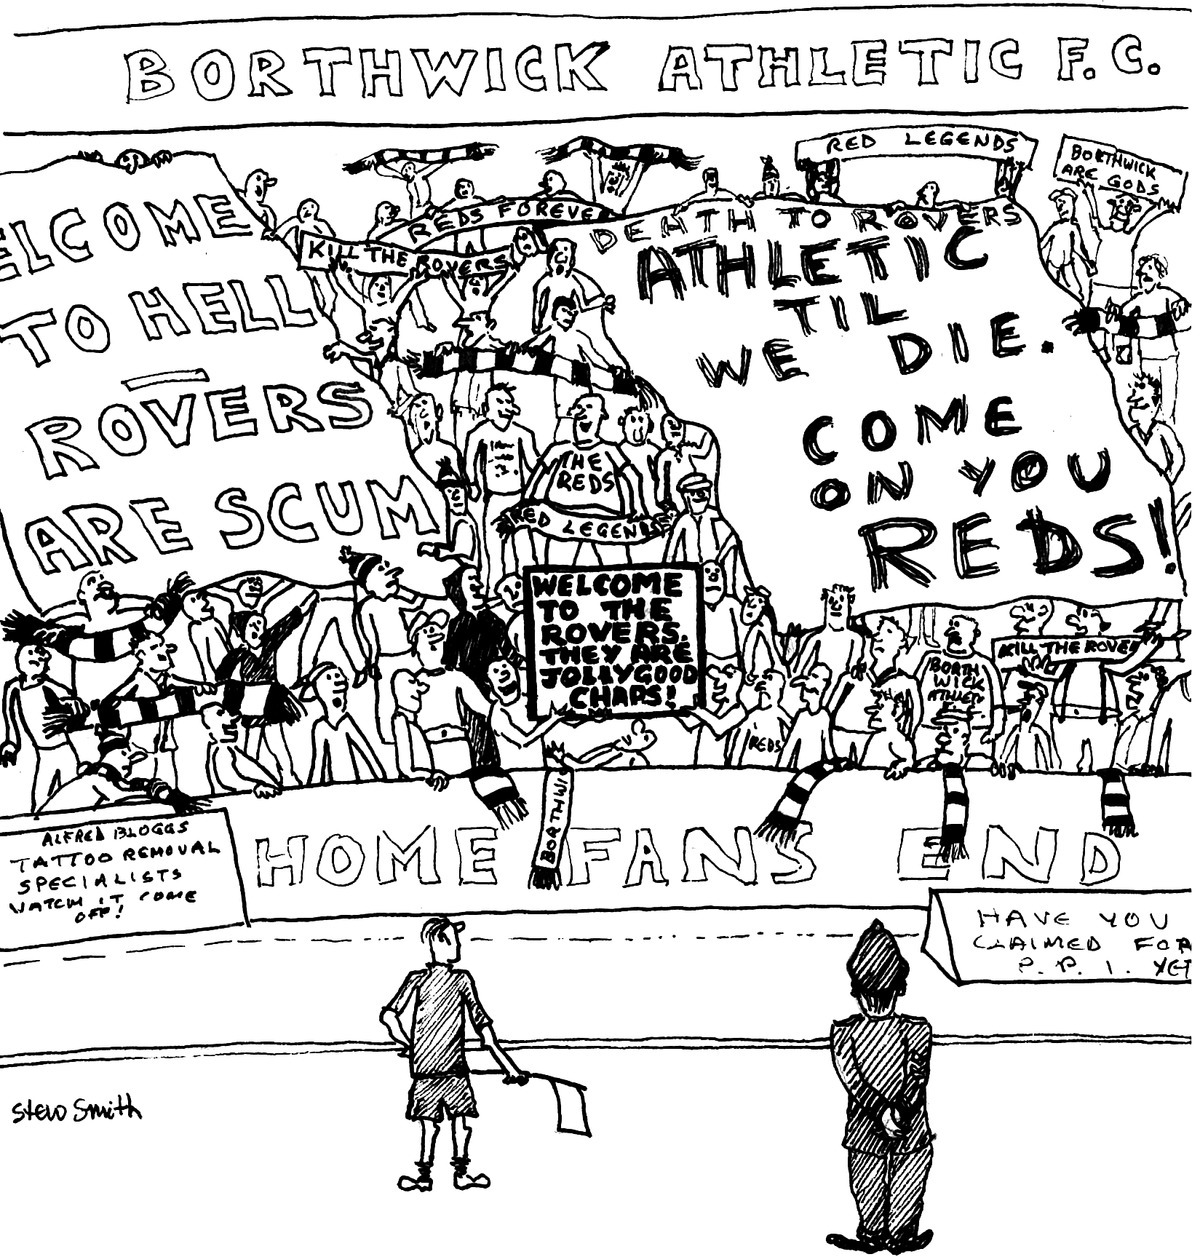 Cartoon illustration of a group of Reds fans with their banners and tarpaulins saying, “Death to Rovers, athletic ‘til we die. Come on you Reds!”, Red legends, Reds forever, etc.